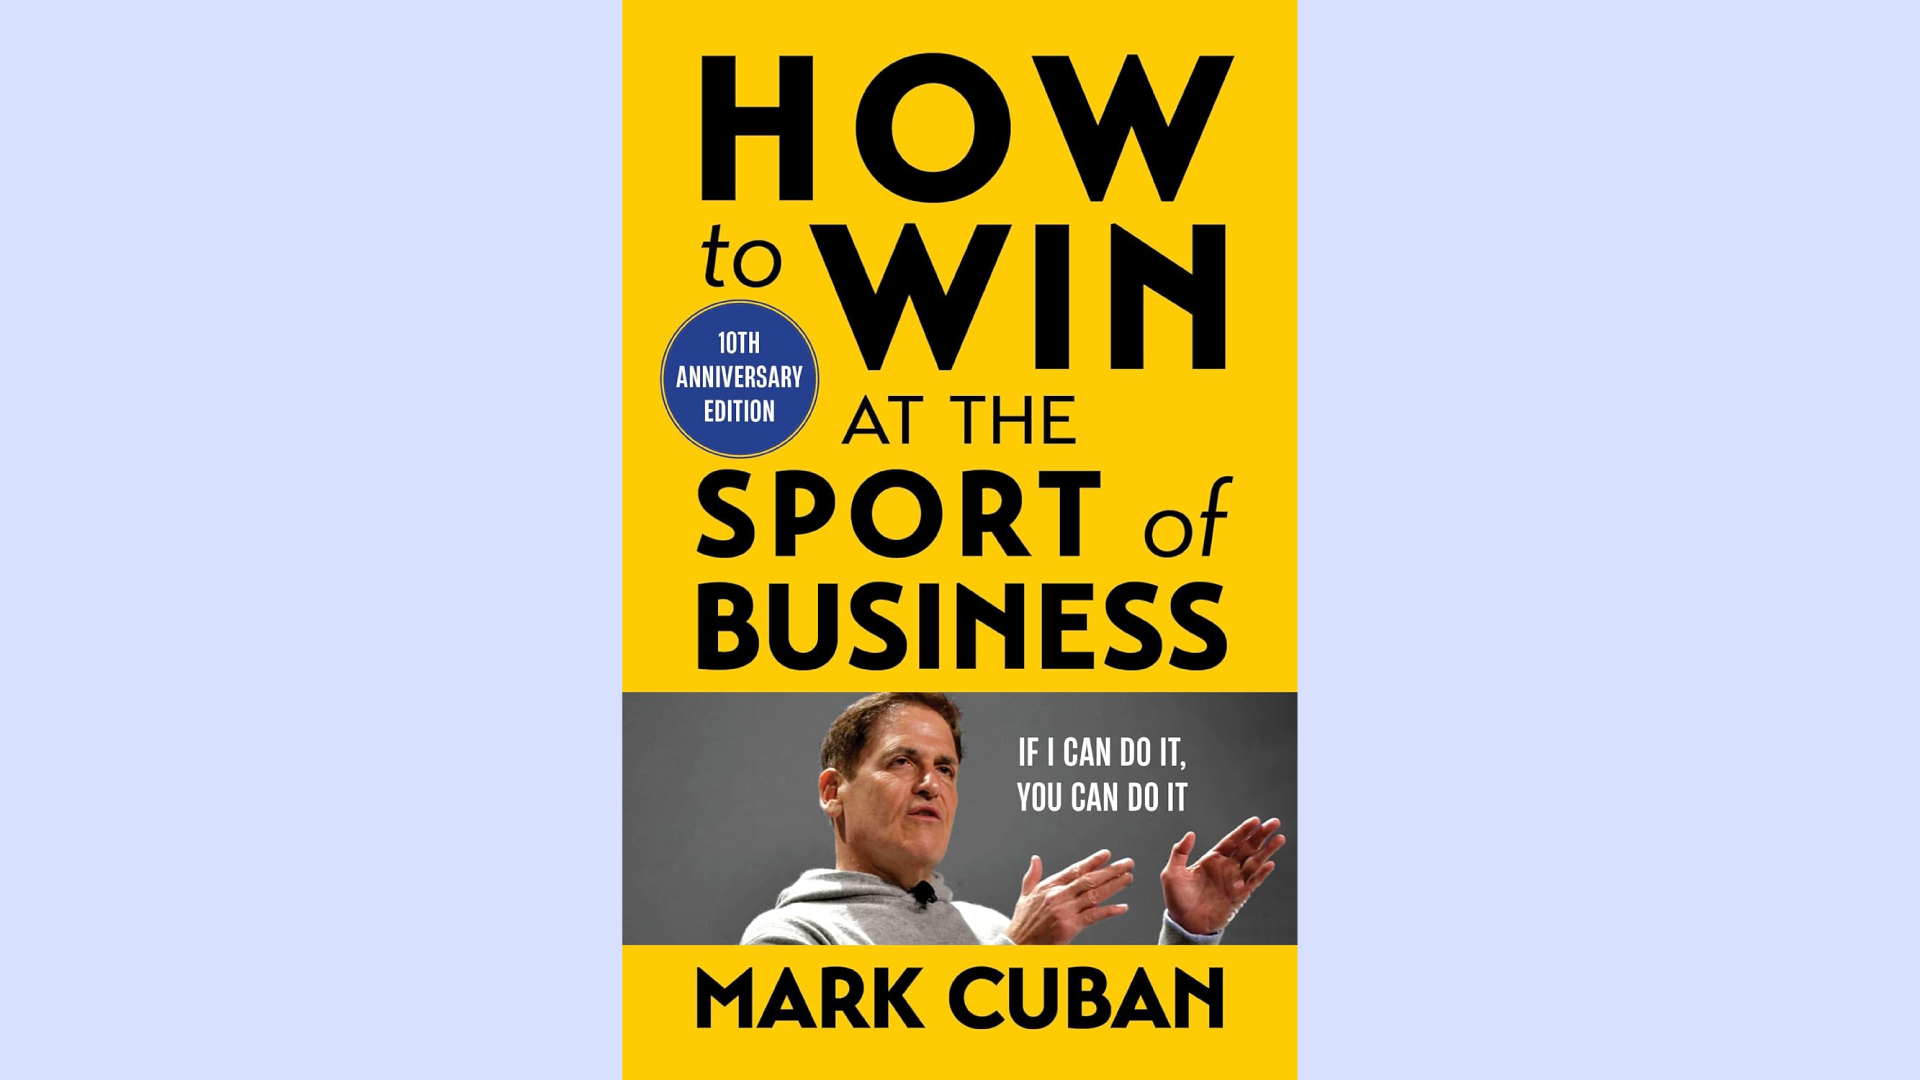 Summary: How to Win at the Sport of Business by Mark Cuban